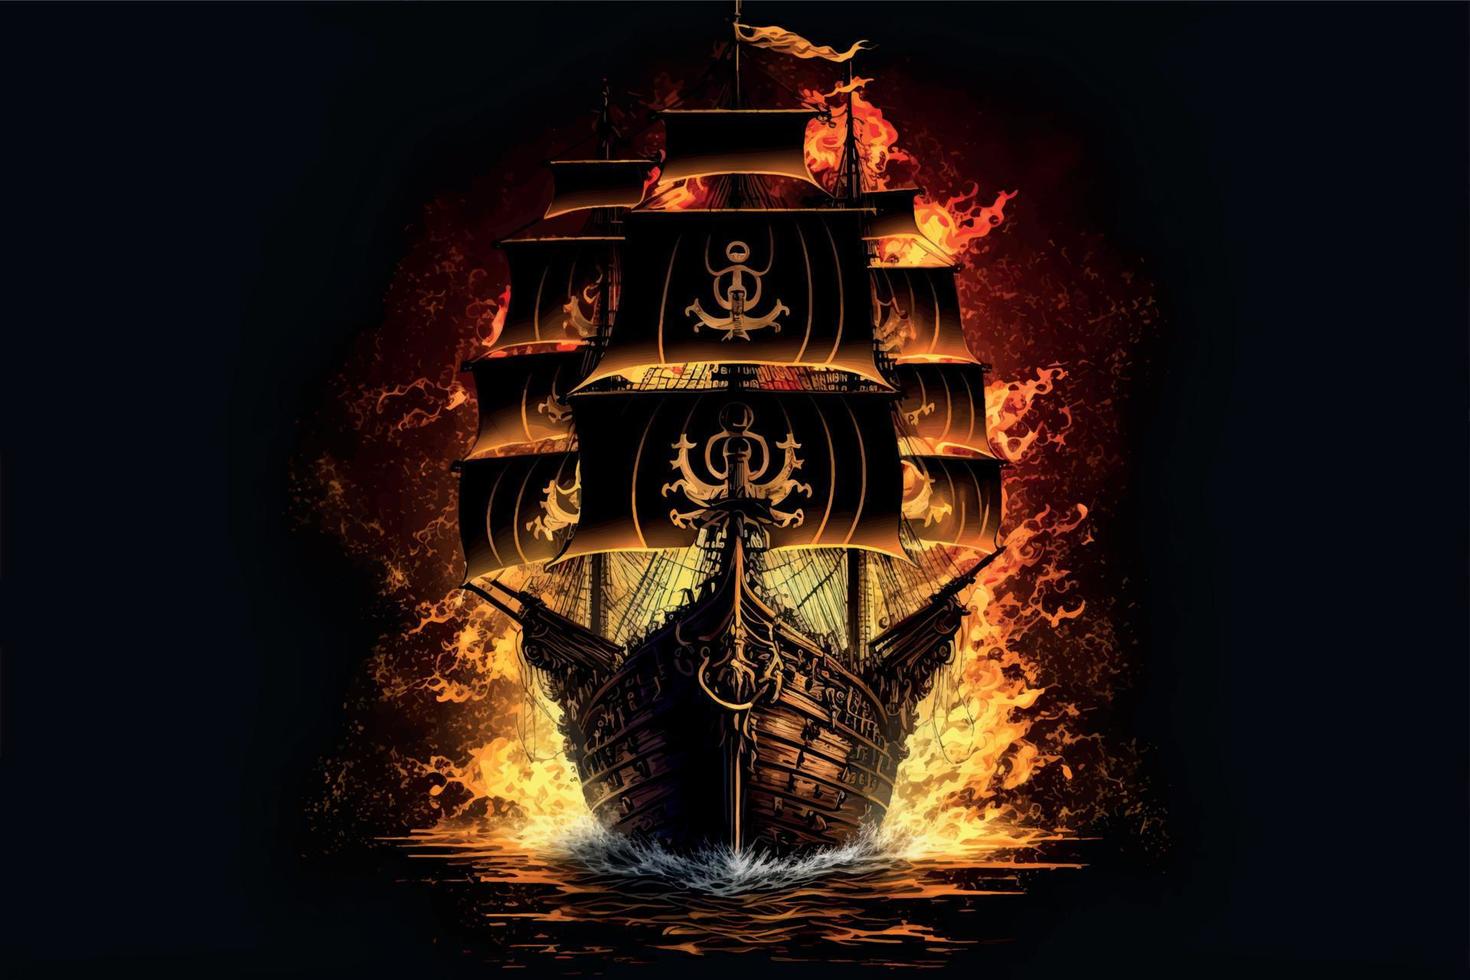 Pirate Ship Background vector